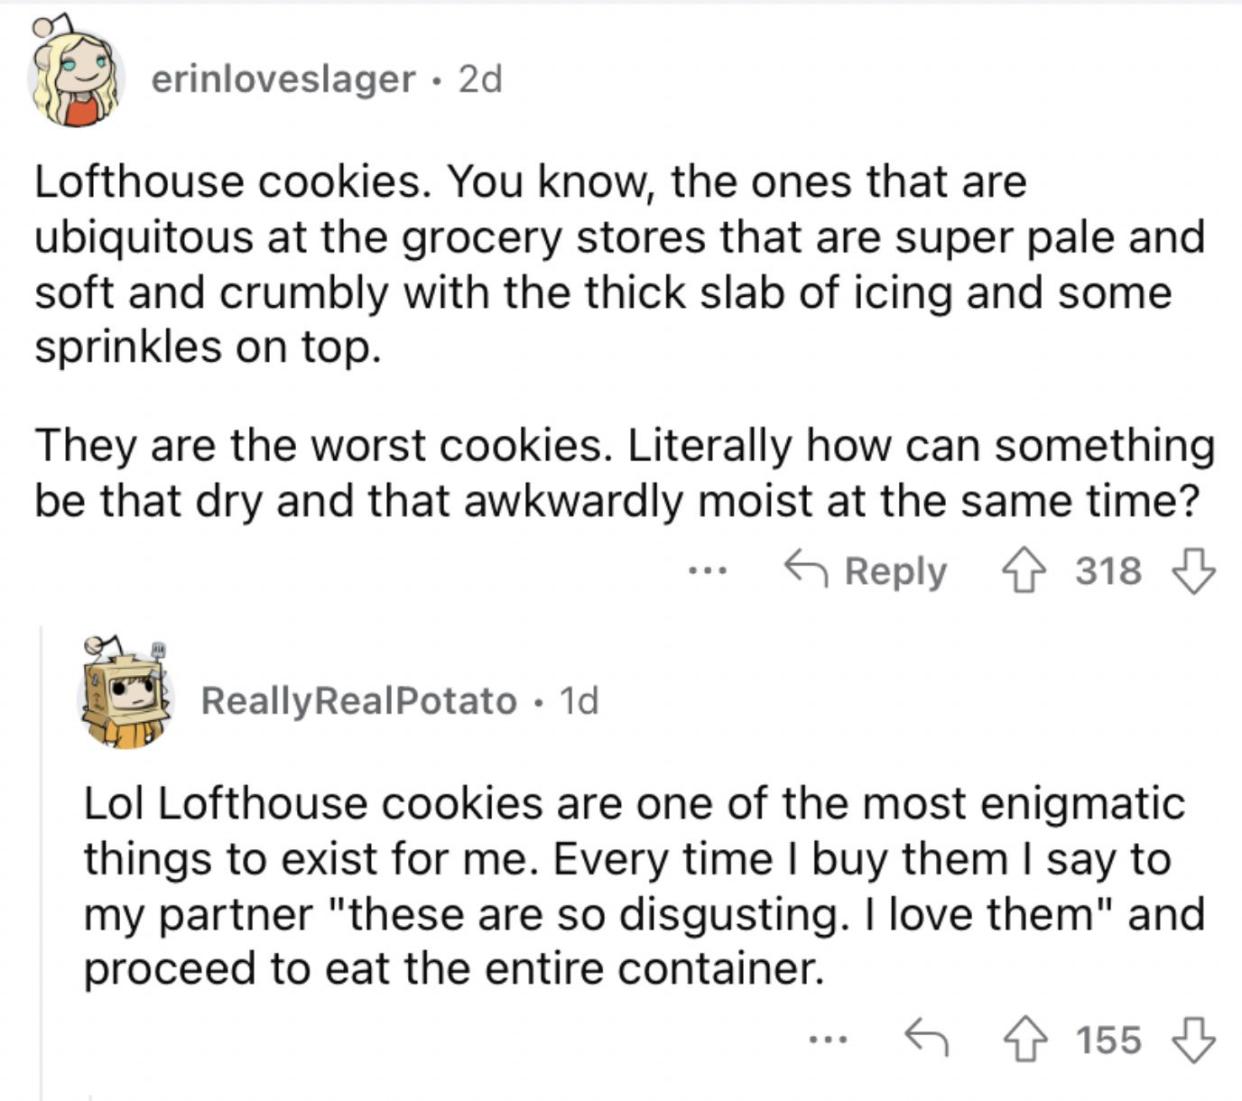 Reddit screenshot from someone who finds Lofthouse cookies to be gross.